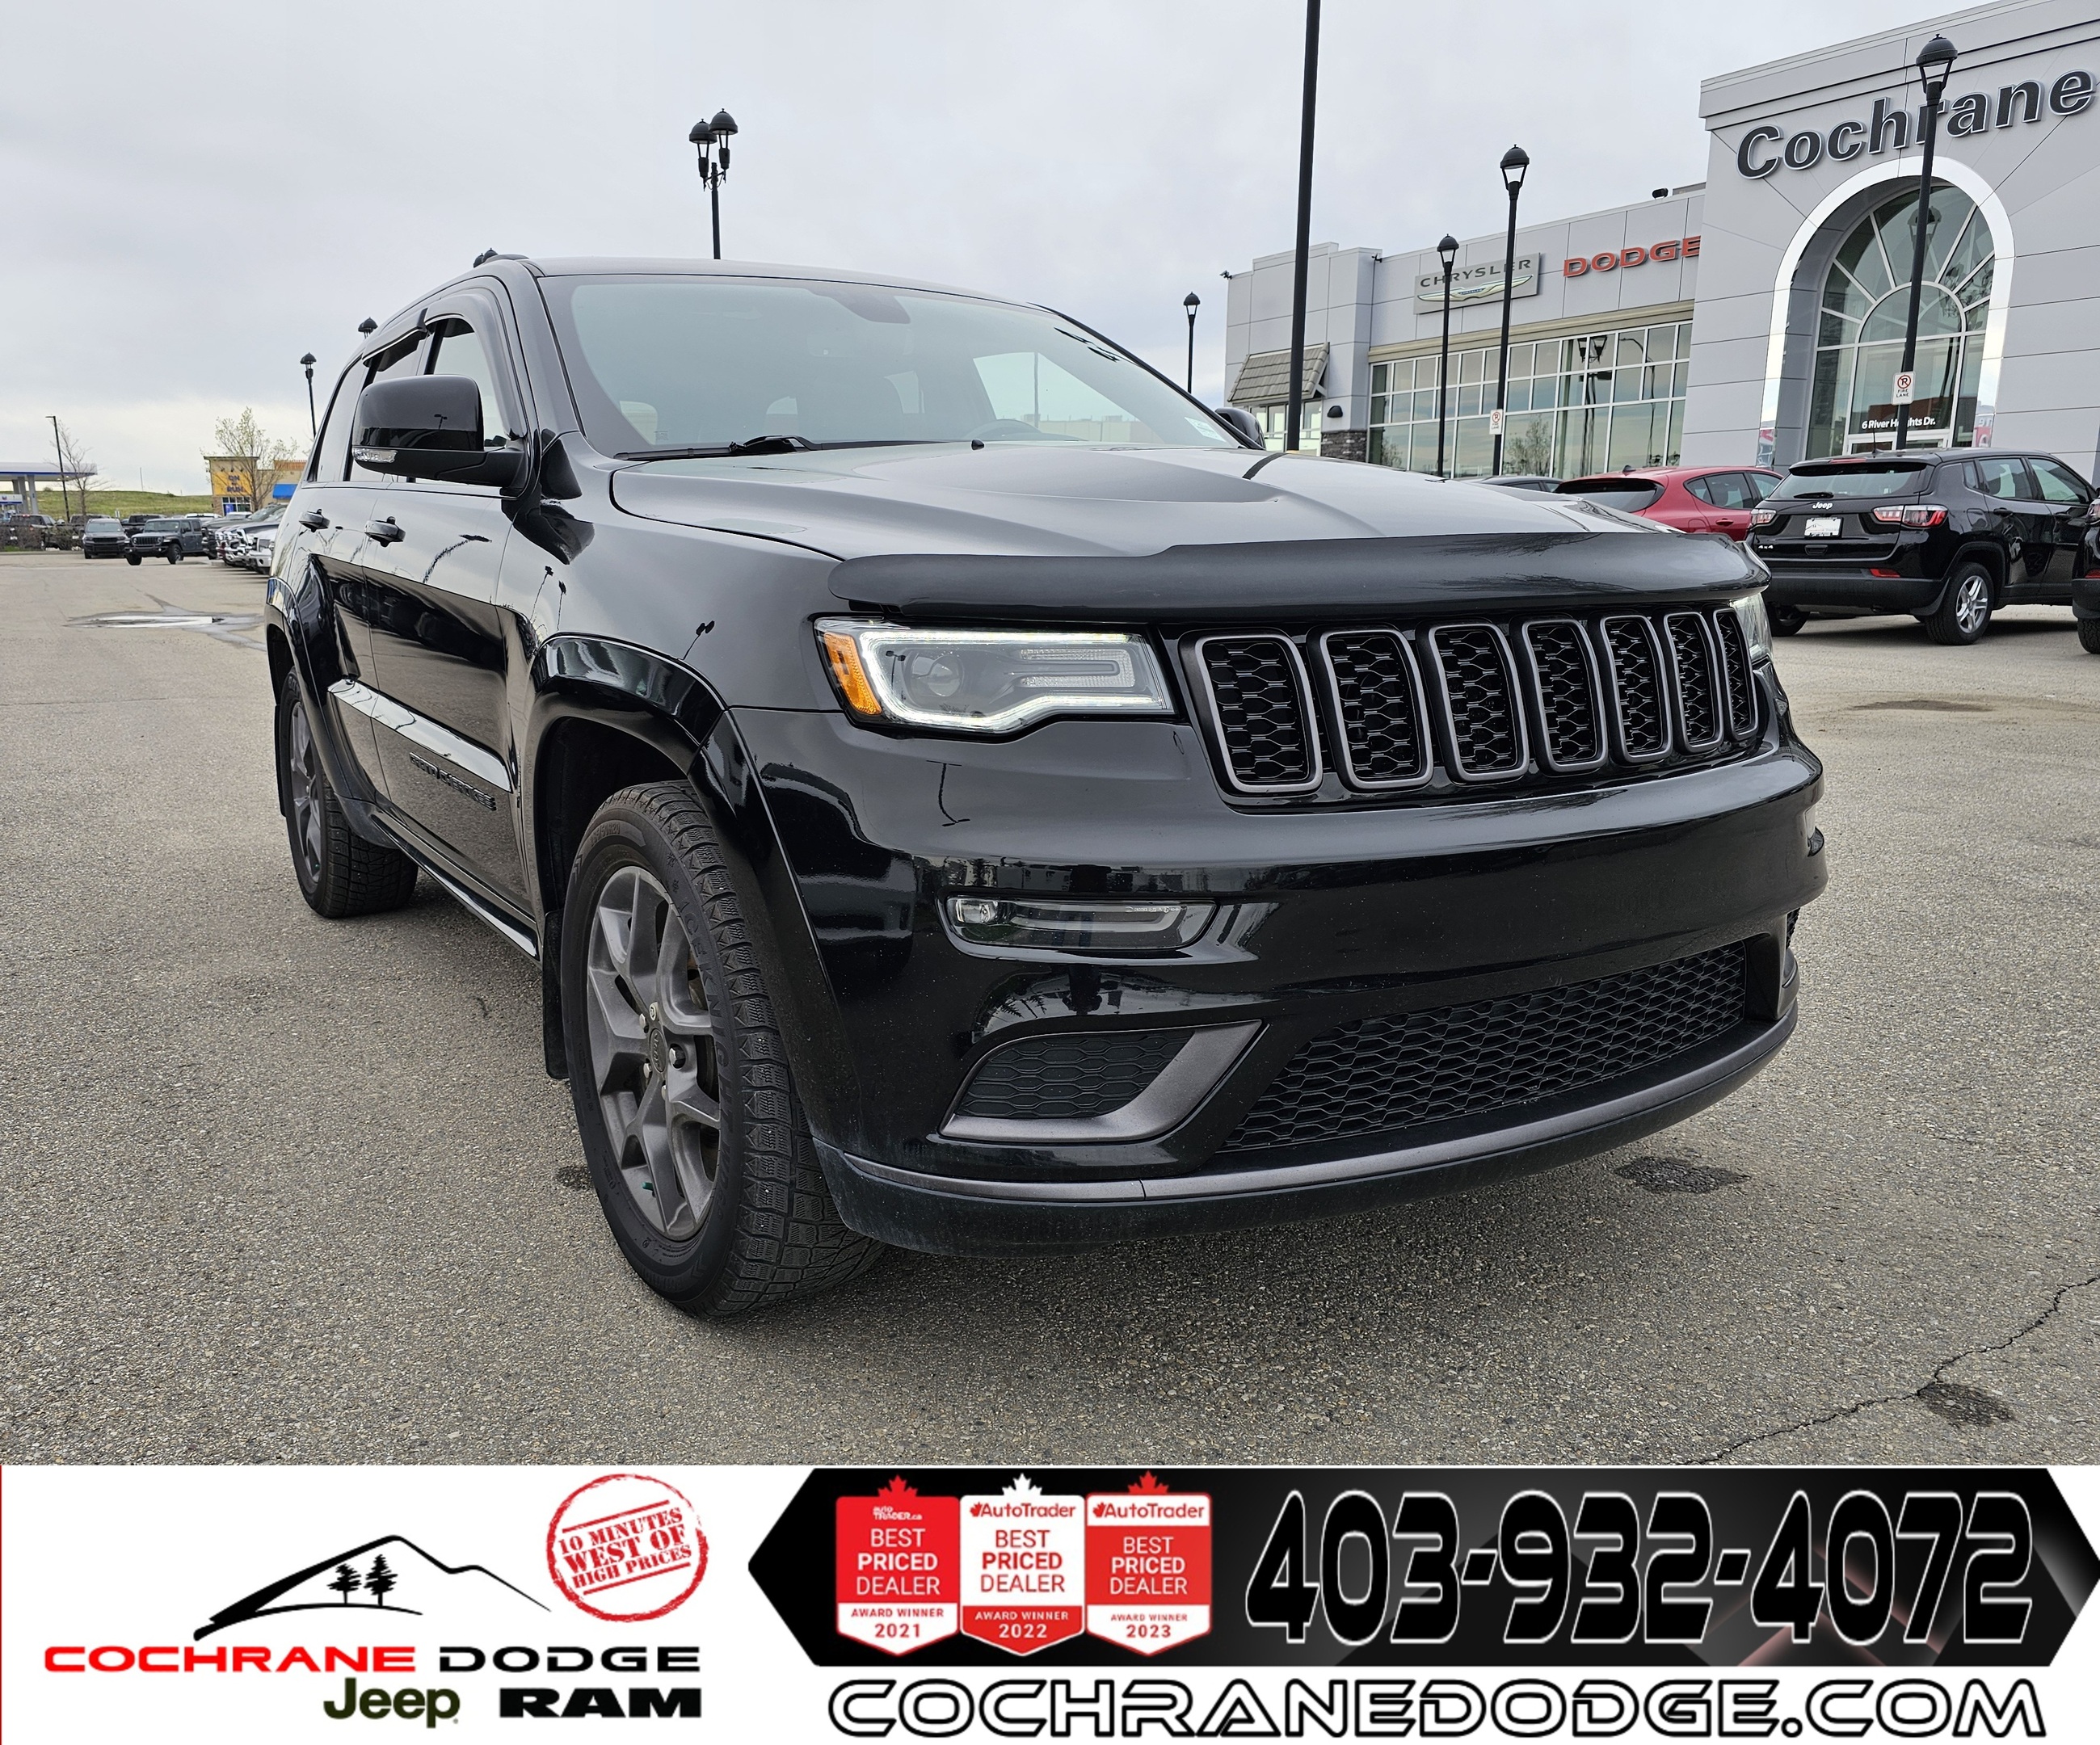 2020 Jeep Grand Cherokee Limited X AWD w/ Extended Warranty!